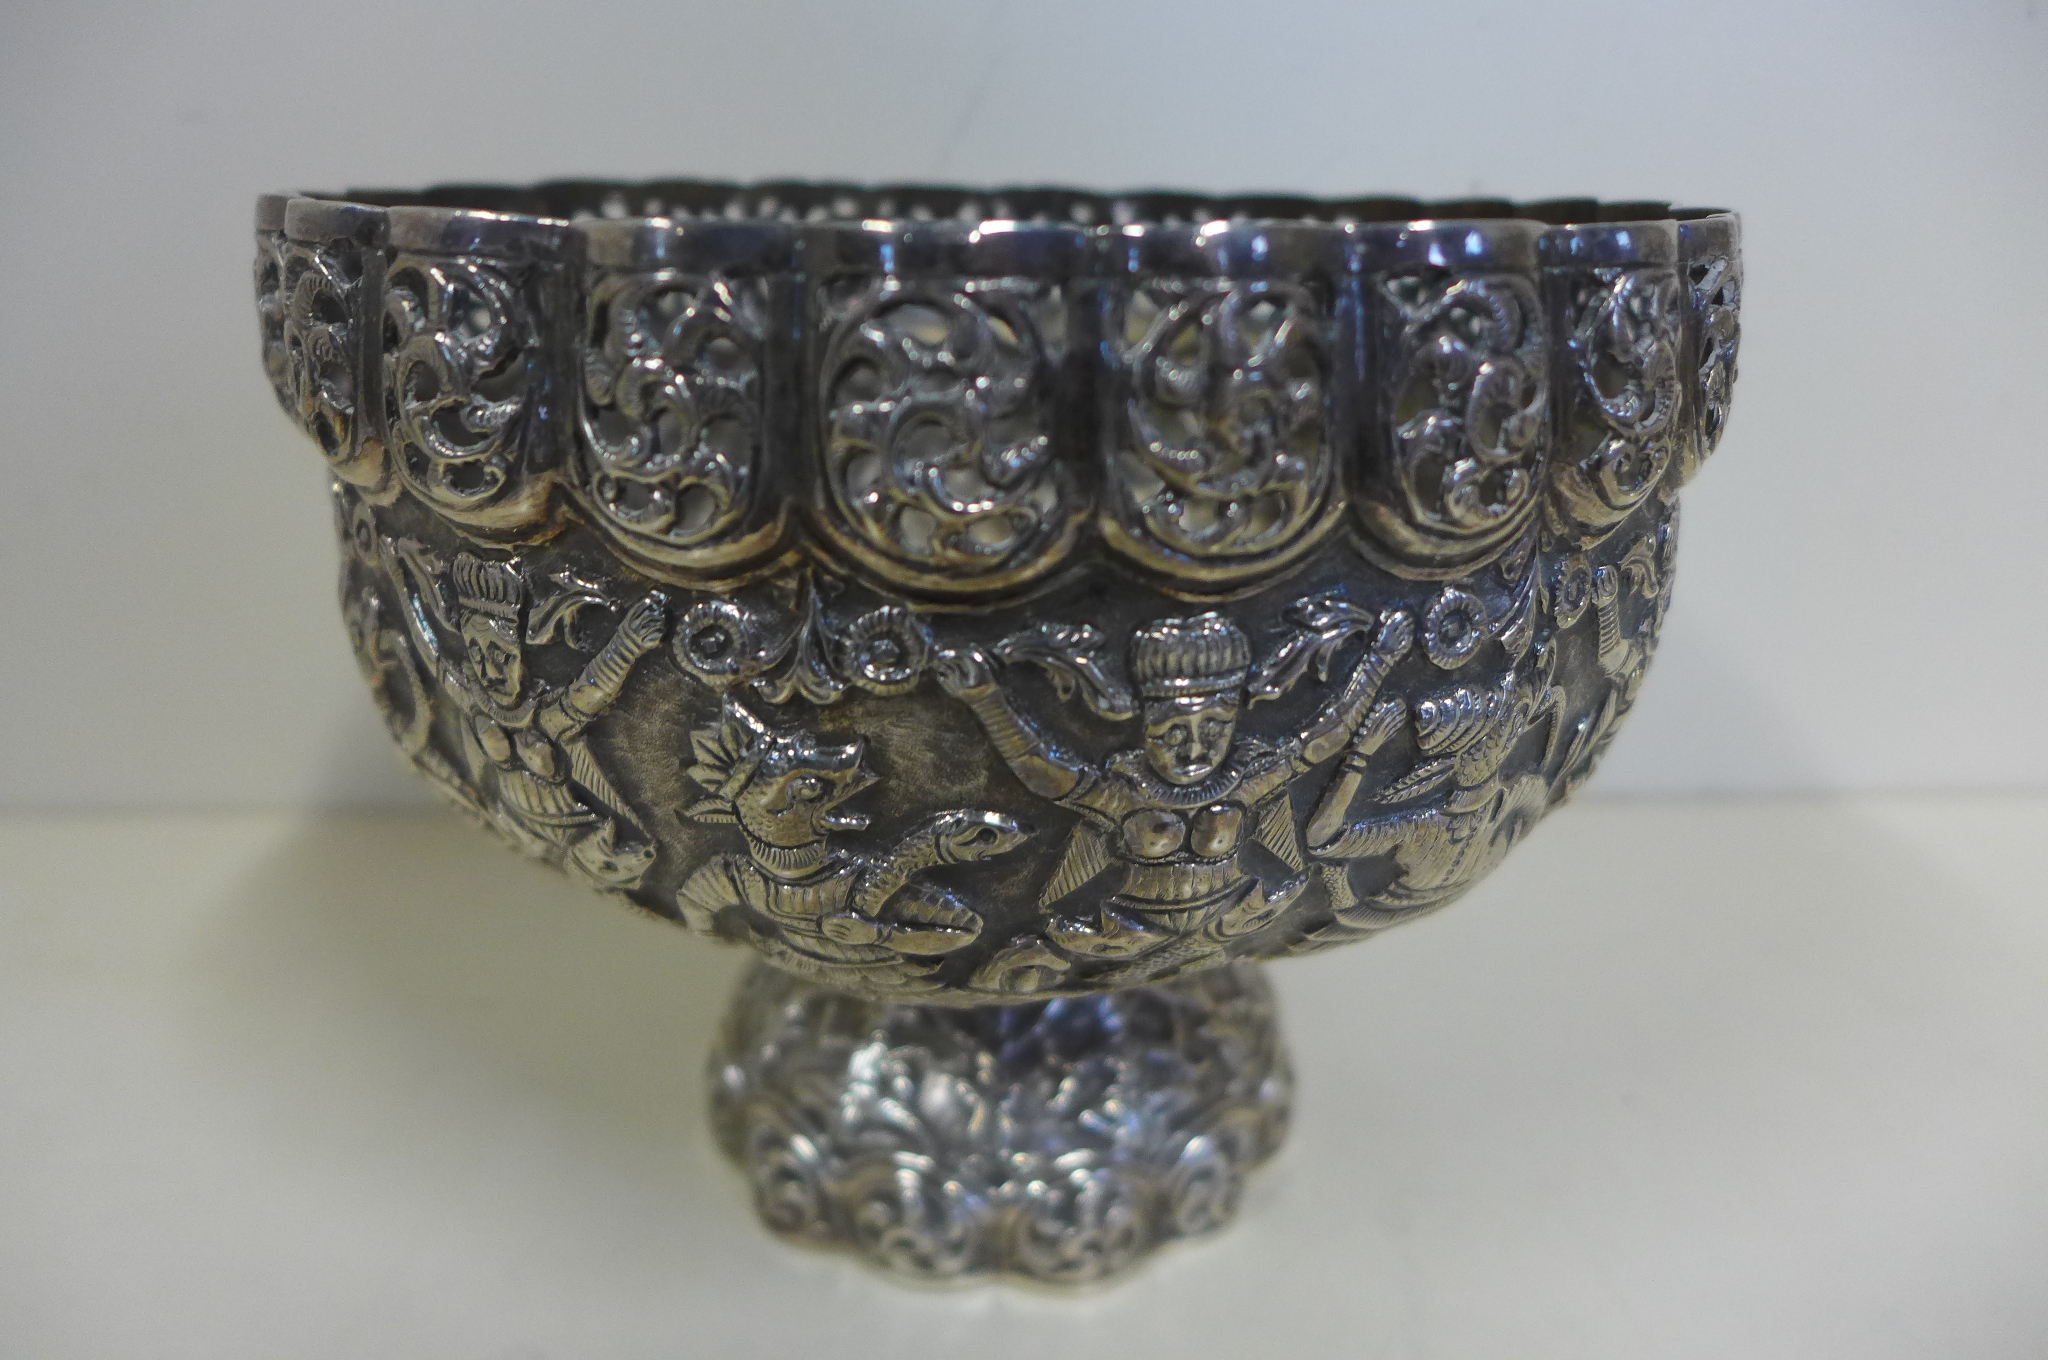 A 19th century Thai silver stem bowl decorated with mythical animals and beings, height 13.5cm, - Image 2 of 4